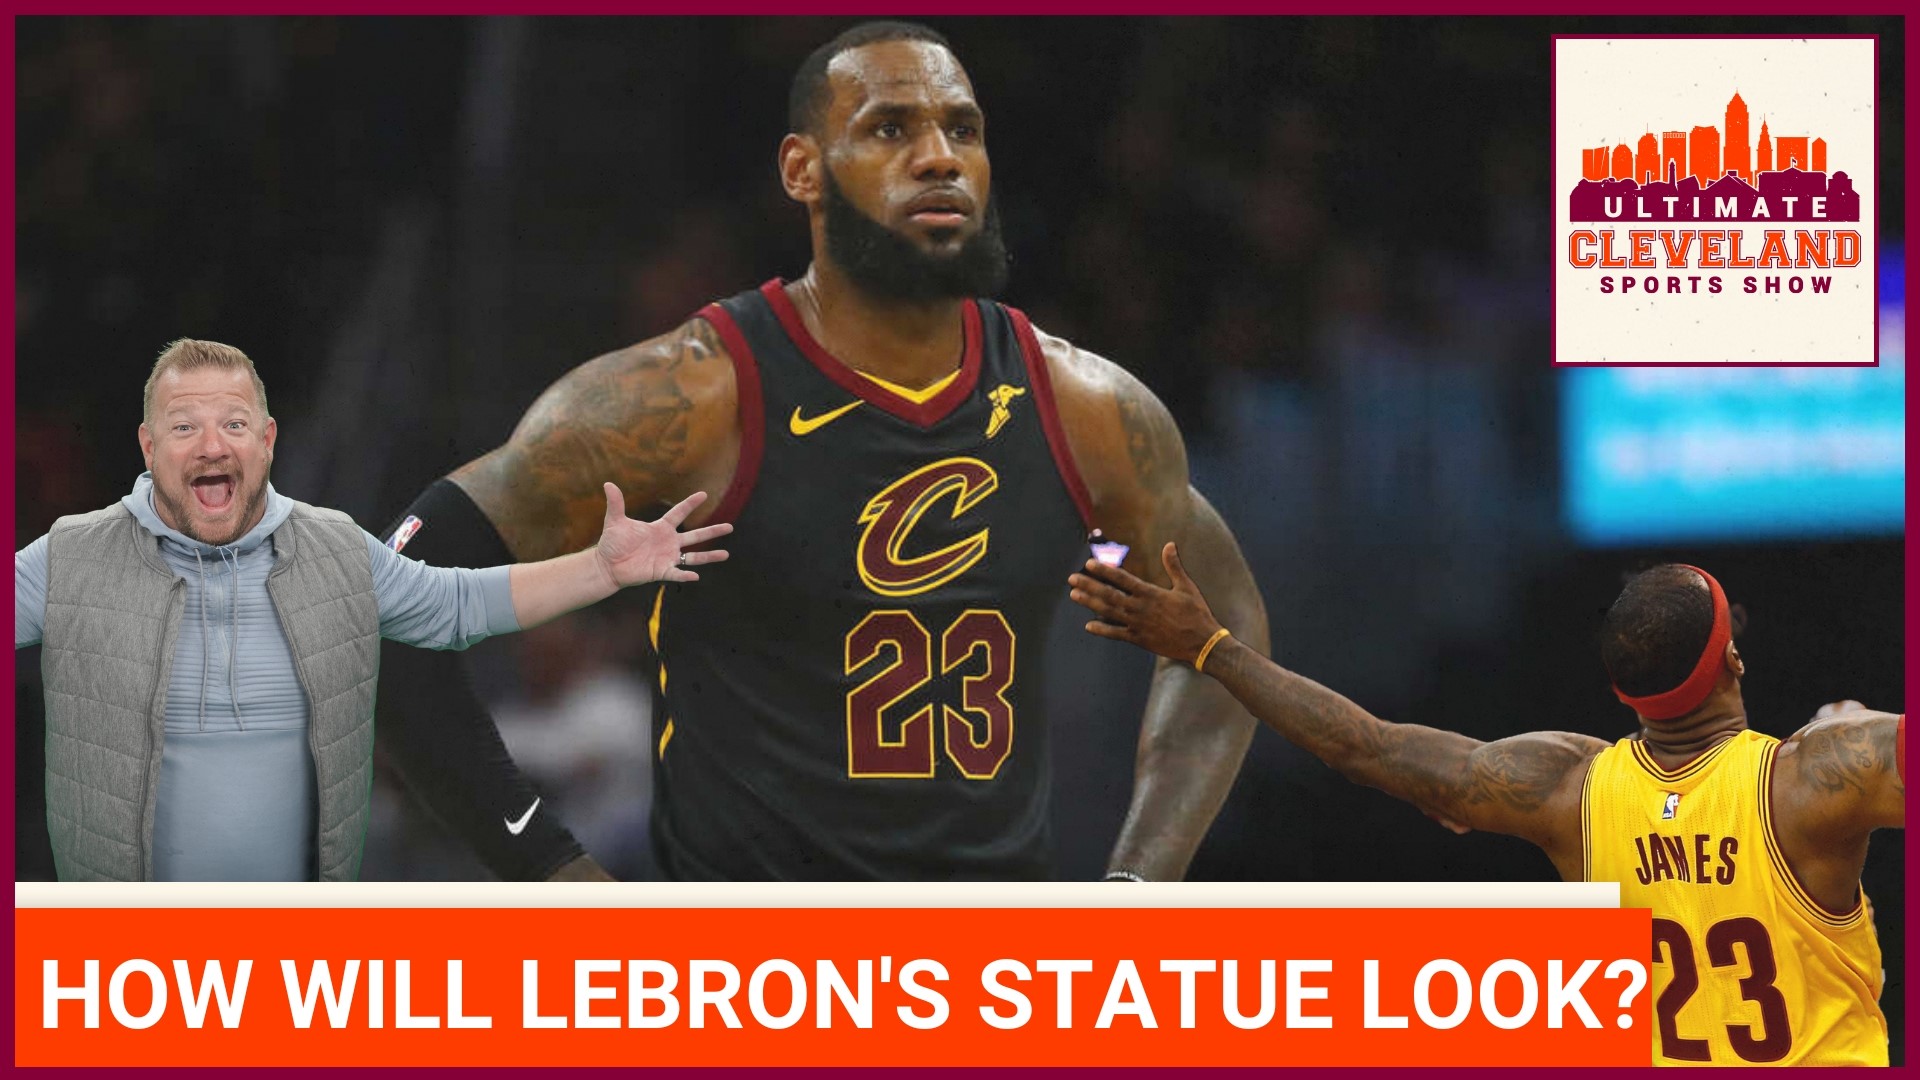 Should the Cavaliers make Lebron's statue the powder toss or the tomahawk dunk?